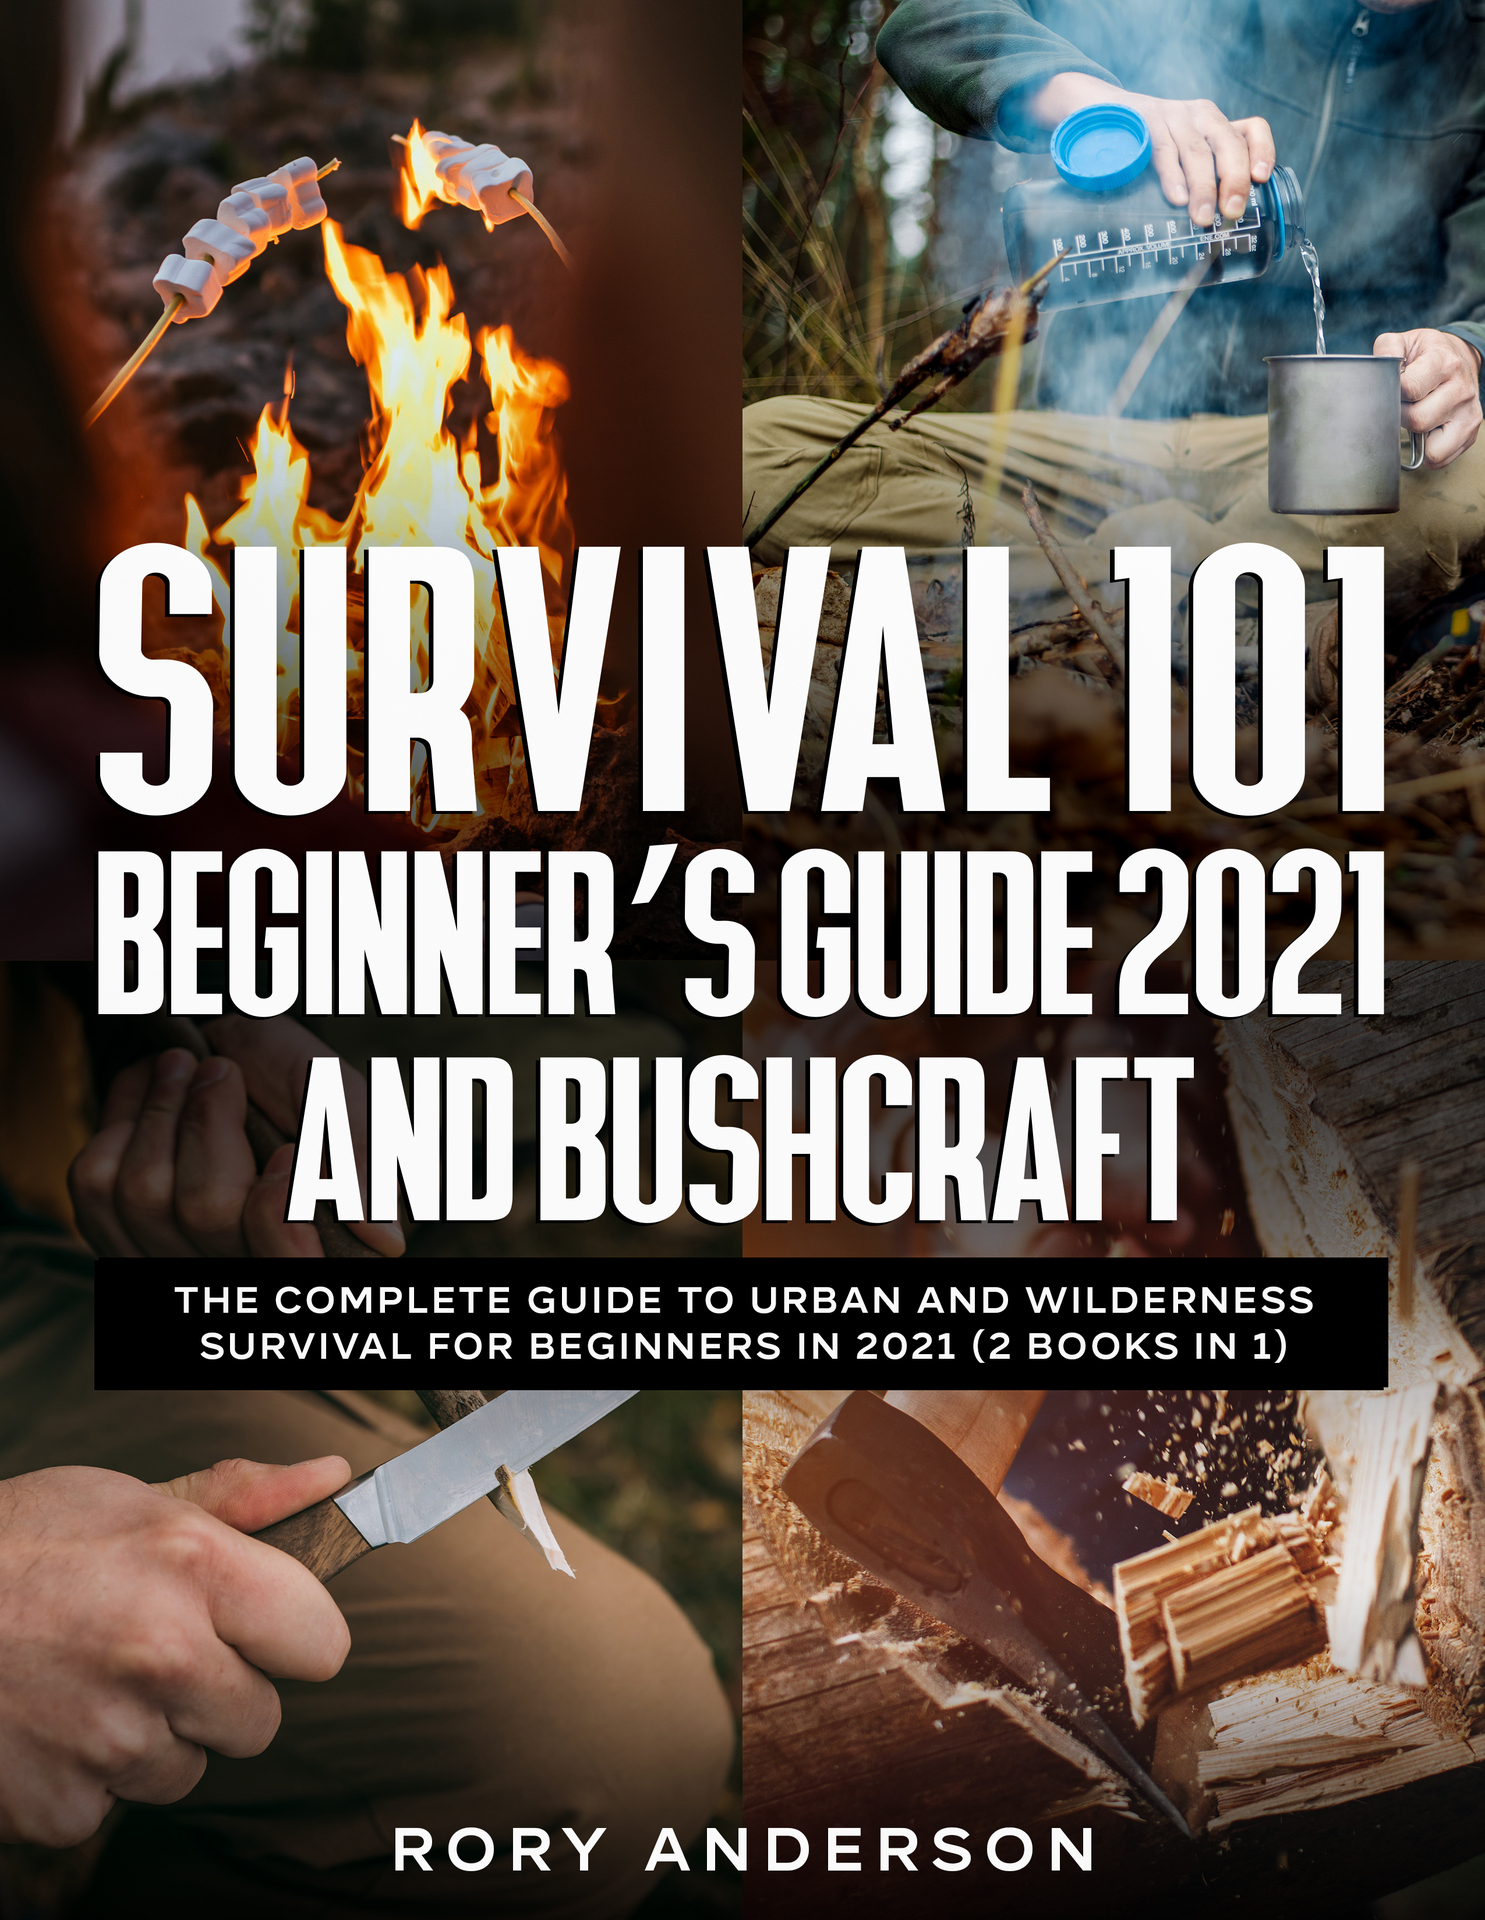 Survival 101 Beginner’s Guide 2021 And Bushcraft - The Complete Guide To Urban And Wilderness ...jpg